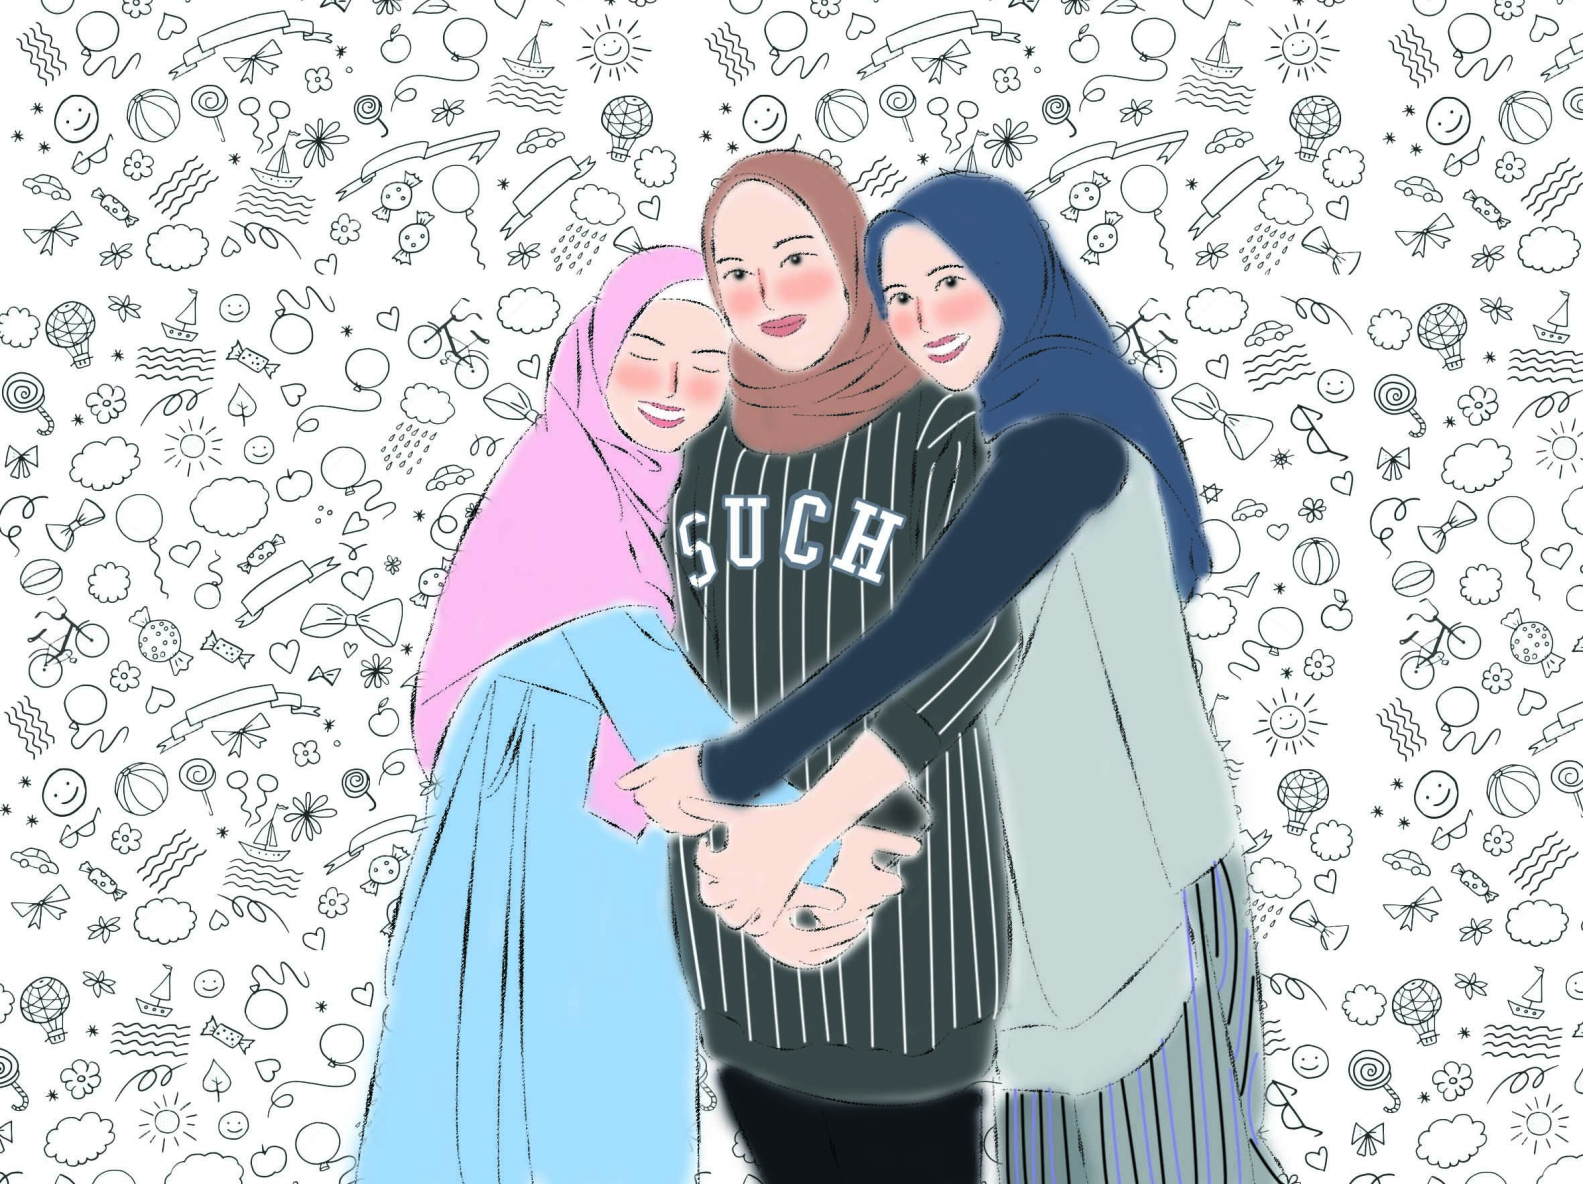 vector illustrarion women with hijab by Dimas Pangestu on Dribbble